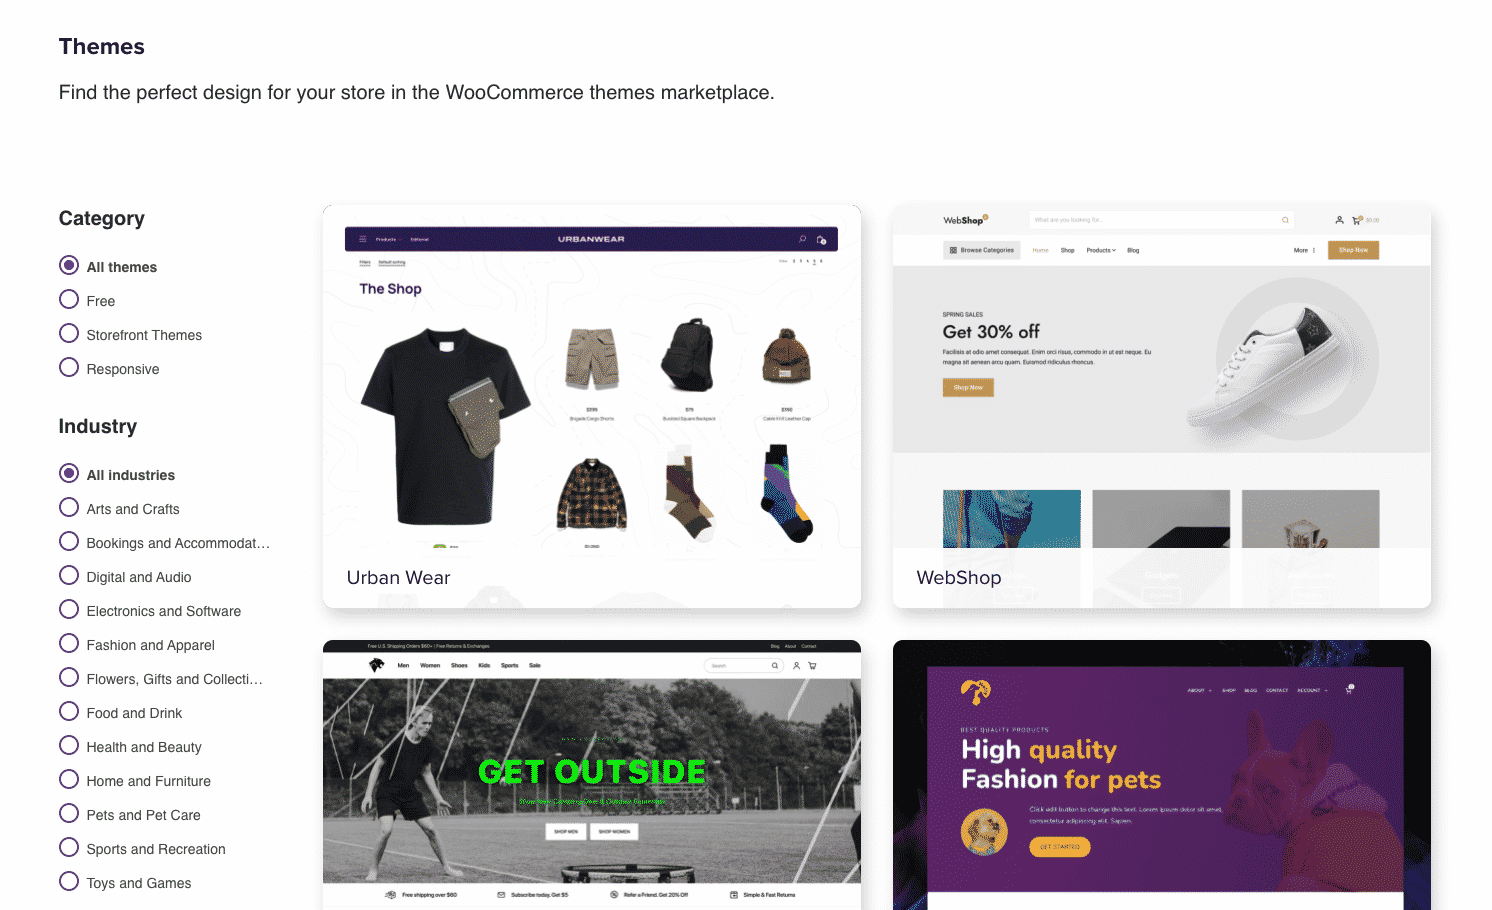 WooCommerce offers a plethora of seemingly limitless and unique themes